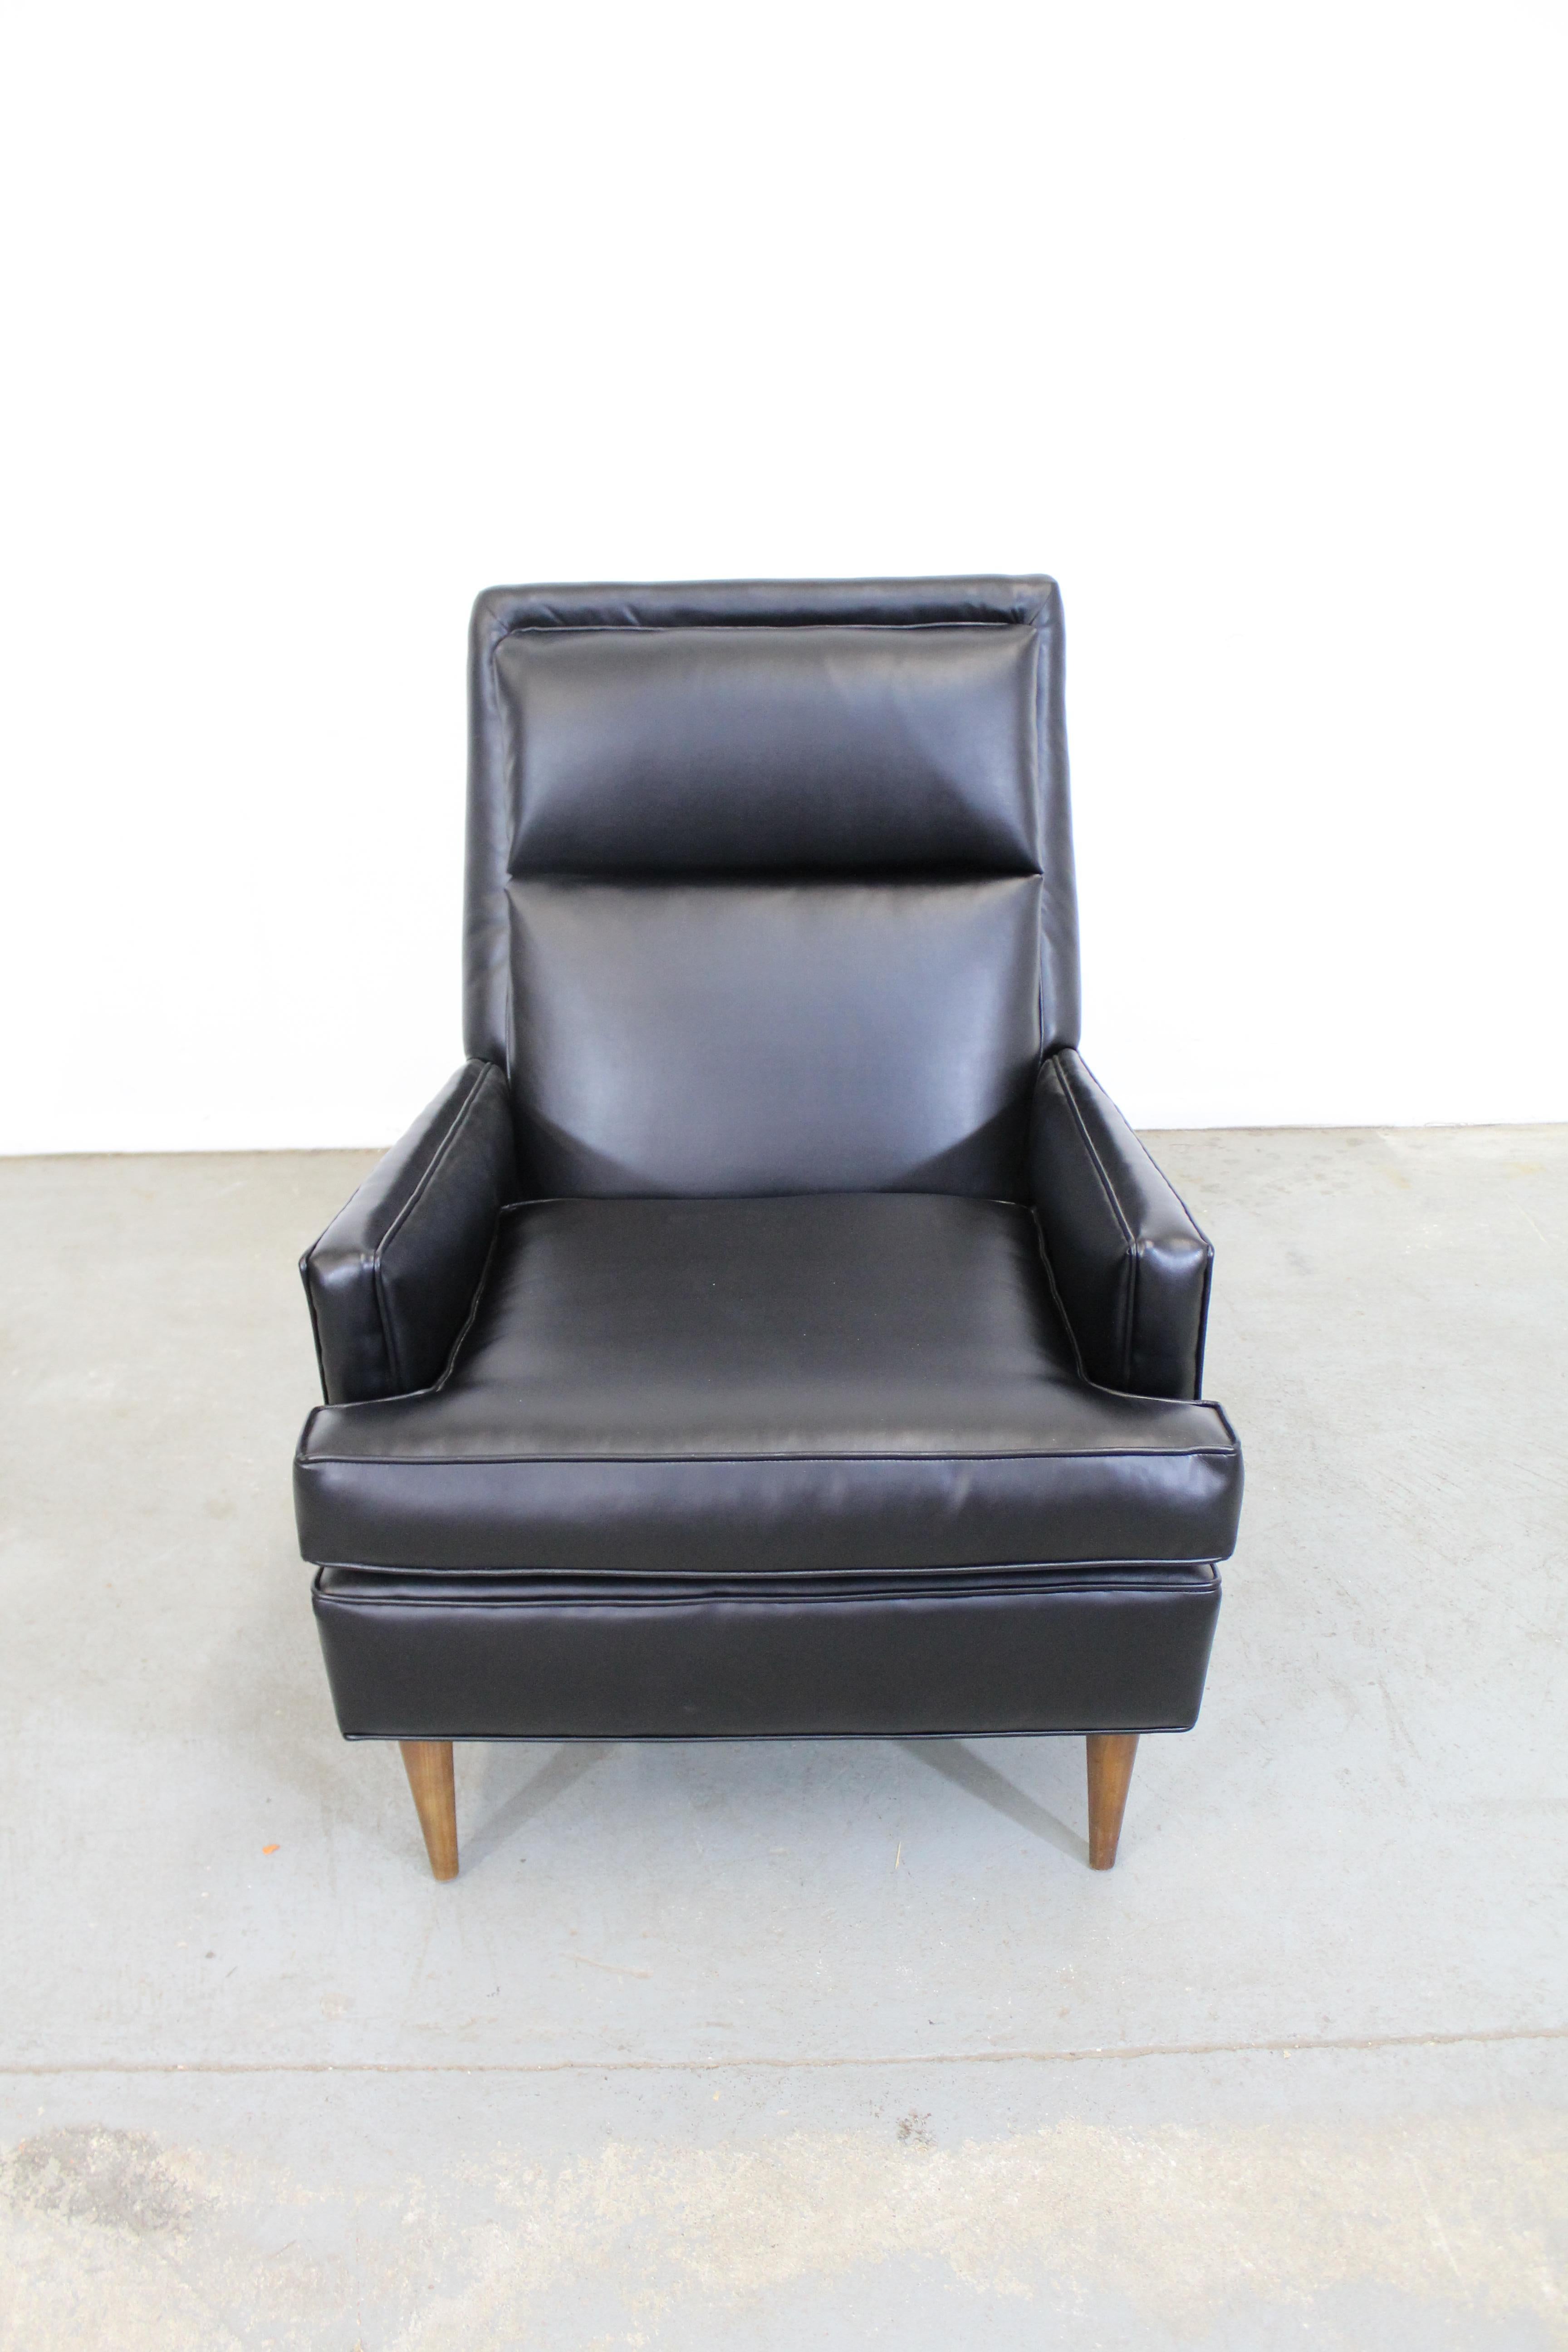 What a find. Offered is a Mid-Century Modern lounge chair attributed to Selig. This piece has been restored with reupholstered bonded leather. In excellent condition, only showing age wear on the legs. Its tag has been removed by previous owner. See